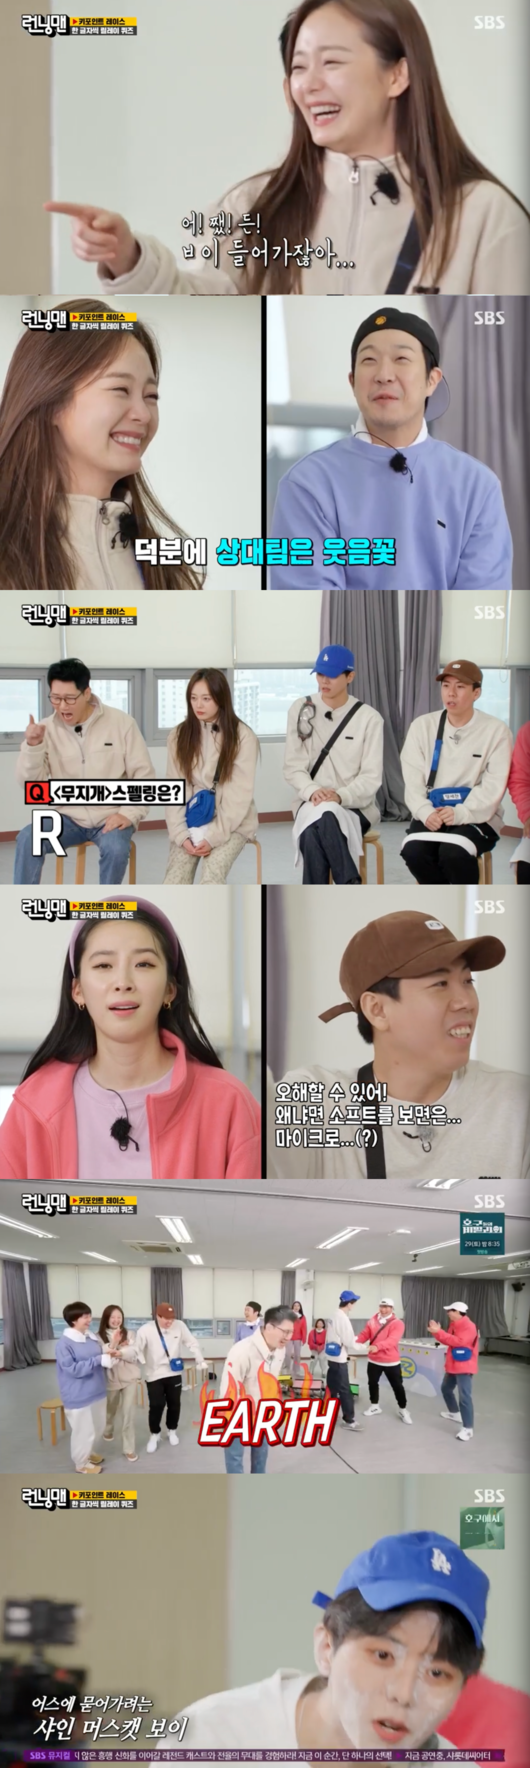 Running Man Lee Hyun and Joo Woo-jae were reborn as guest of the Akbari, but the fixed members caught the victory by spewing the years.On SBS Running Man broadcasted on the afternoon of the 23rd, Yoo Jae-Suk - Kim Jong-kook - Lee Hyun - Irene is divided into a tall team, Ji Suk-jin - Yang Se-chan - Jeon So-min - Joo Woo-jae is a mid-level team, Haha - Song Ji-hyo - Songhai is divided into a single team I opened it.Keypoint Race followed last week and relay quiz time came back first.It was a bad answer feast.Jeon So-min shouted Burrather shower because he did not know the bridal shower, and Song Ji-hyo laughed when he confessed that he thought Silicon Valley was Techno Valley.Joo U-jae was wrong for the Shinemouthcats and Songhai was unable to get Keanu Reeves right.Kim Jong-kook was surprised to see that he was wrong about the Donghak Peasant Movement, but Yang Se-chan was shot and hit.The level of the Running Man official hunks was particularly serious: Yang Se-chan and Jeon So-min did not know Rainbow Spelling, but proudly shunned the penalty by shouting a pass.In addition, Song Ji-hyo - Jeon So-min - Yang Se-chan had to sit side by side and shout Earths English earth spelling, but it made those who shouted only passes confidently.Then the name tag removal race was held.It was Race that could take off the name tag if I found someone to find five acorns hidden in the building and bought the In-N-Out Burger rights.Irene and Song Ji-hyo then attacked fiercely and took off the name tag.Lee Hyun killed Songhai of the single-string team left alone with the help of Kim Jong-kook.The confrontation between Yang Se-chan and Yoo Jae-Suk, who purchased each others In-N-Out Burger rights, ended with a victory for Yang Se-chan in a tight battle.Instead, Kim Jong-kook had Ji Suk-jin in-N-Out Burger and only Yang Se-chan, Joo Woo-jae, Jeon So-min, Kim Jong-kook and Lee Hyun remained.The team found a lot of acorns and made Kim Jong-kook an open target and Ji Suk-jin also revived.Eventually, a 4:2 showdown took place and Kim Jong-kook and Lee Hyun eliminated Joo Woo-jae, Yang Se-chan and Jeon So-min with overwhelming power.However, Ji Suk-jin directed a name tag against Kim Jong-kook, who was weak.In the end, Ji Suk-jin vs. Lee Hyun confronted Ji Suk-jin with the evil spirit that they showed in The Snatching Girls.But Ji Suk-jin showed off her age and removed Lee Hyuns name tag; the bumbling Lee Hyun lay on the floor as it was.But the performances of Joo U-jae and Lee Hyun are absolutely amazing.The final penalties were Songhai, Song Ji-hyo and Jeon So-min.Among the three, Song Ji-hyo and Jeon So-min were hit by a fresh cream Bomb while guest Songhai managed to avoid penalties.running man